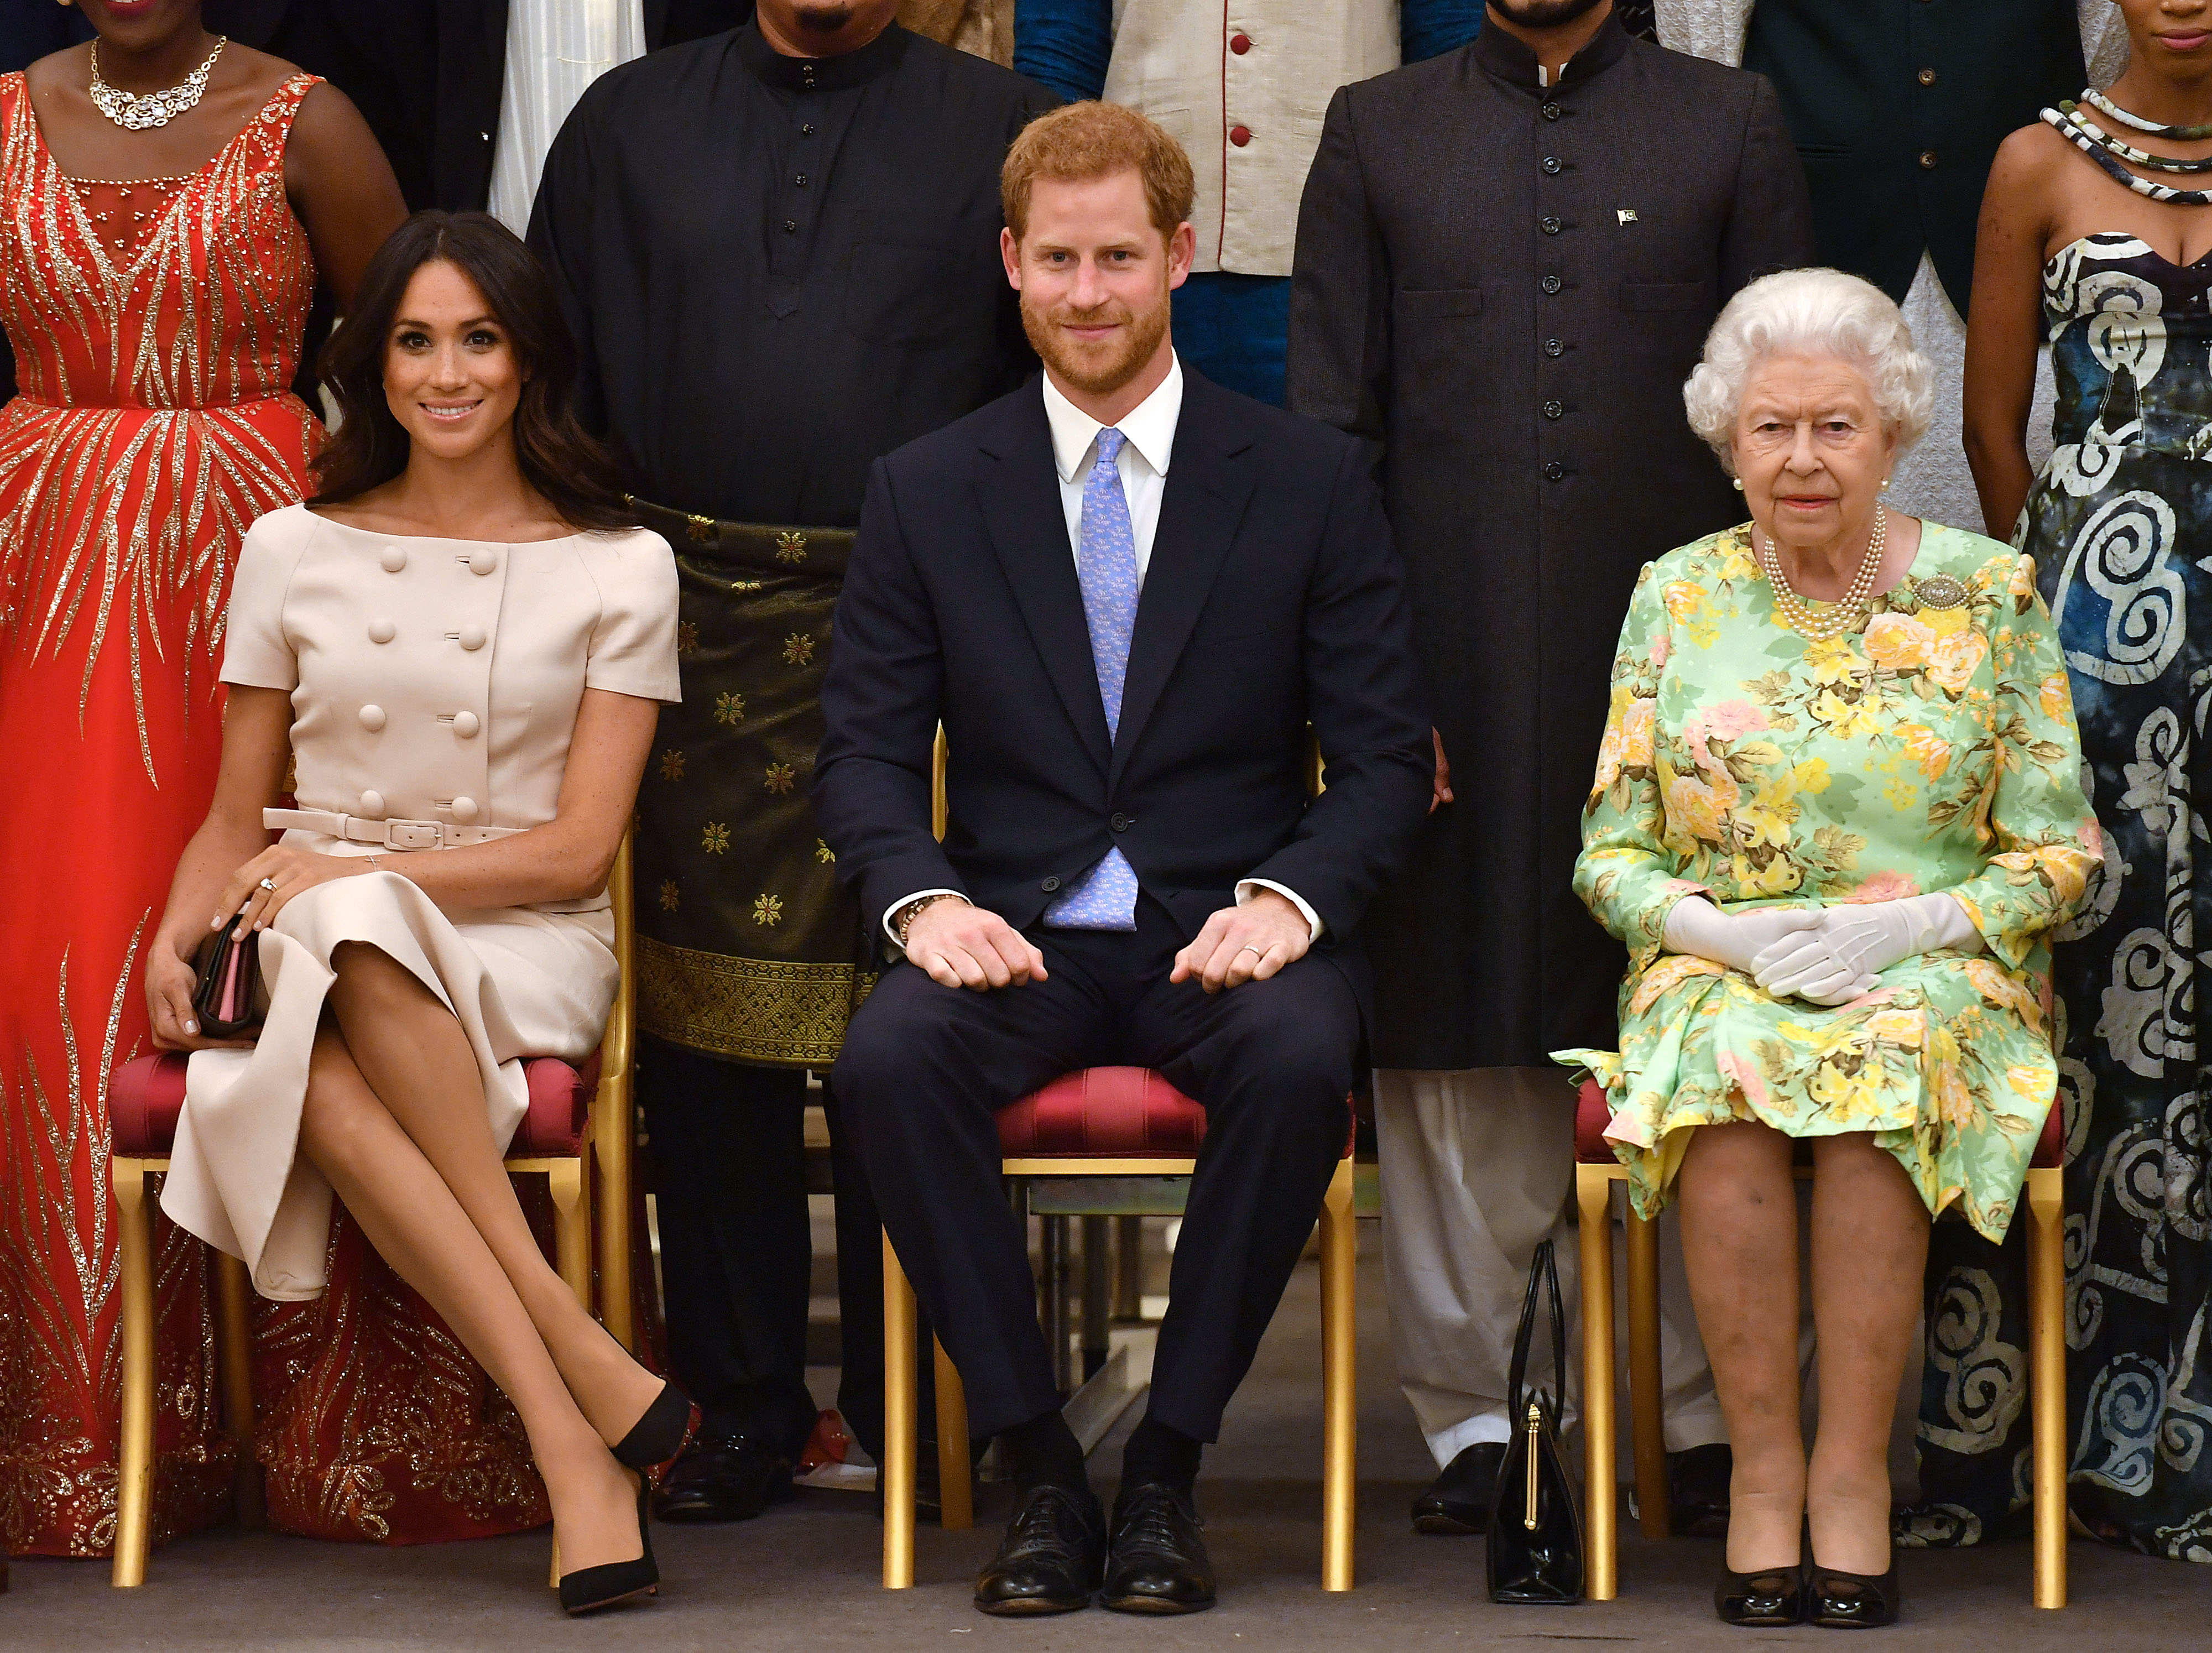 Meghan, Harry and the Queen at Buckingham Palace in London. (PHOTO: AFP / John Stillwell)